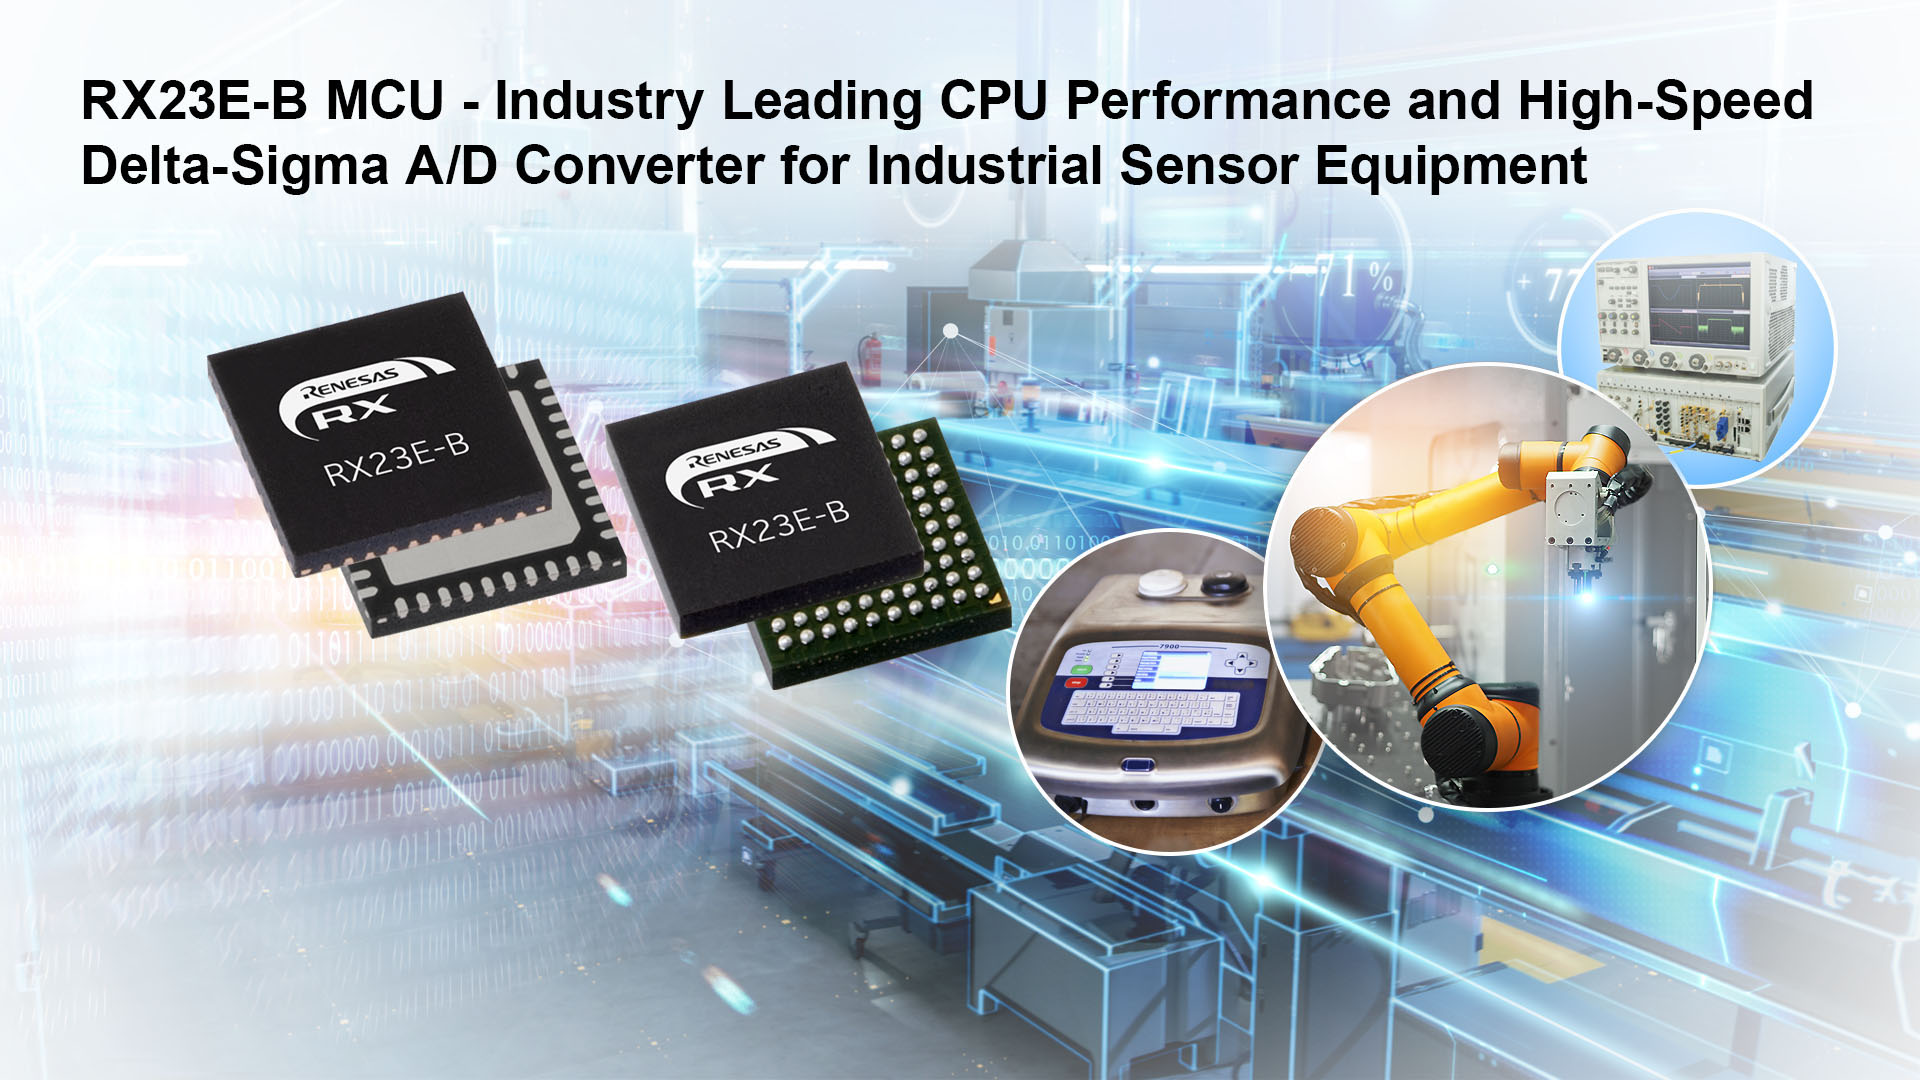 Renesas Introduces 32-bit RX MCU with High-Speed, High-Precision Analog Front End for High-End Industrial Sensor Systems